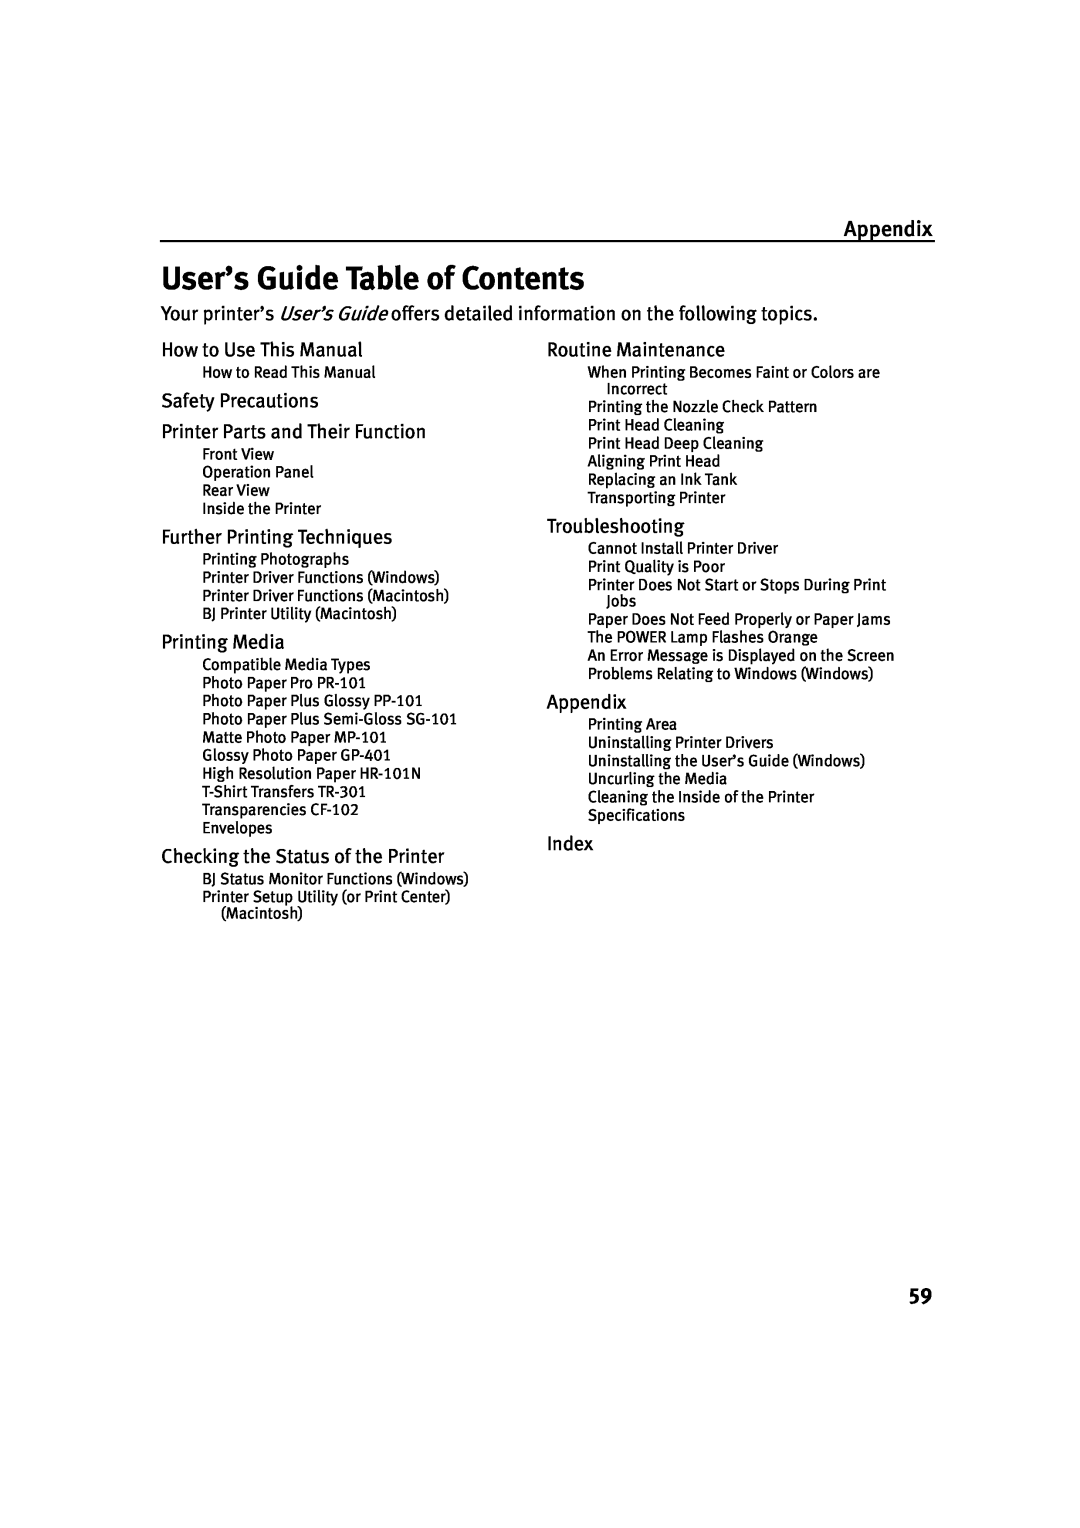 Canon IP1500 quick start User’s Guide Table of Contents, Appendix 